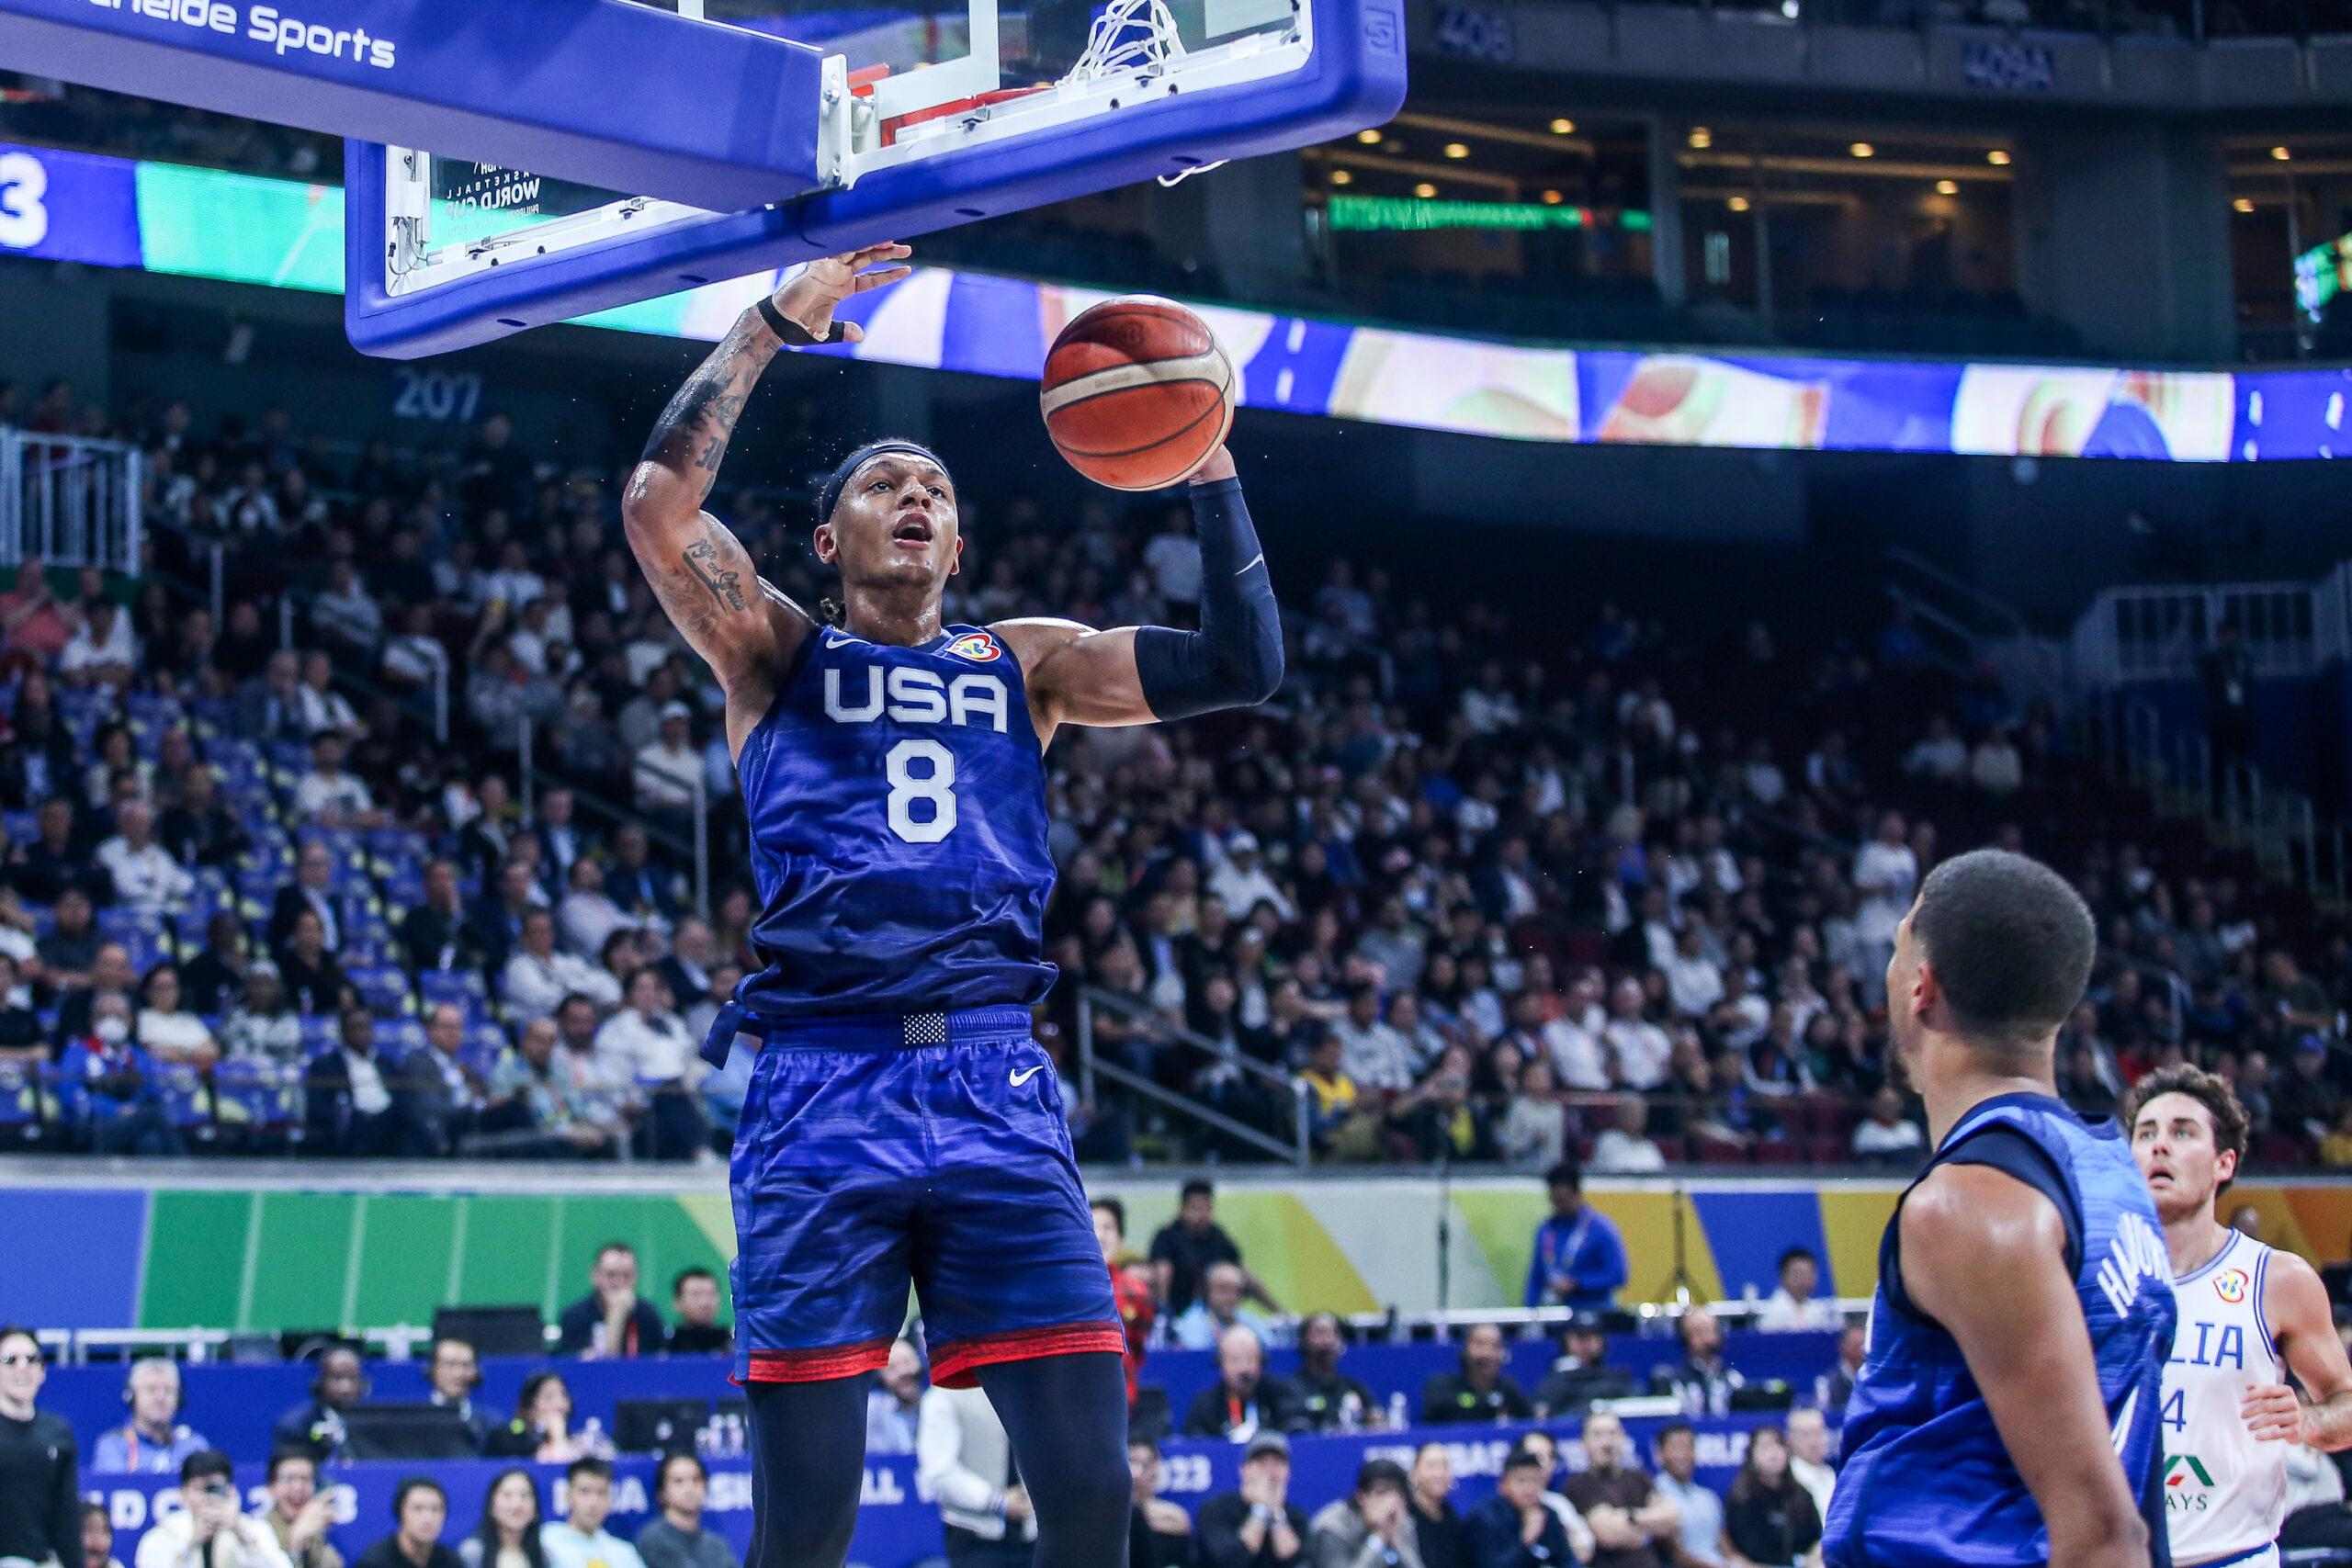 Why Paolo Banchero is playing for Team USA instead of Team Italy